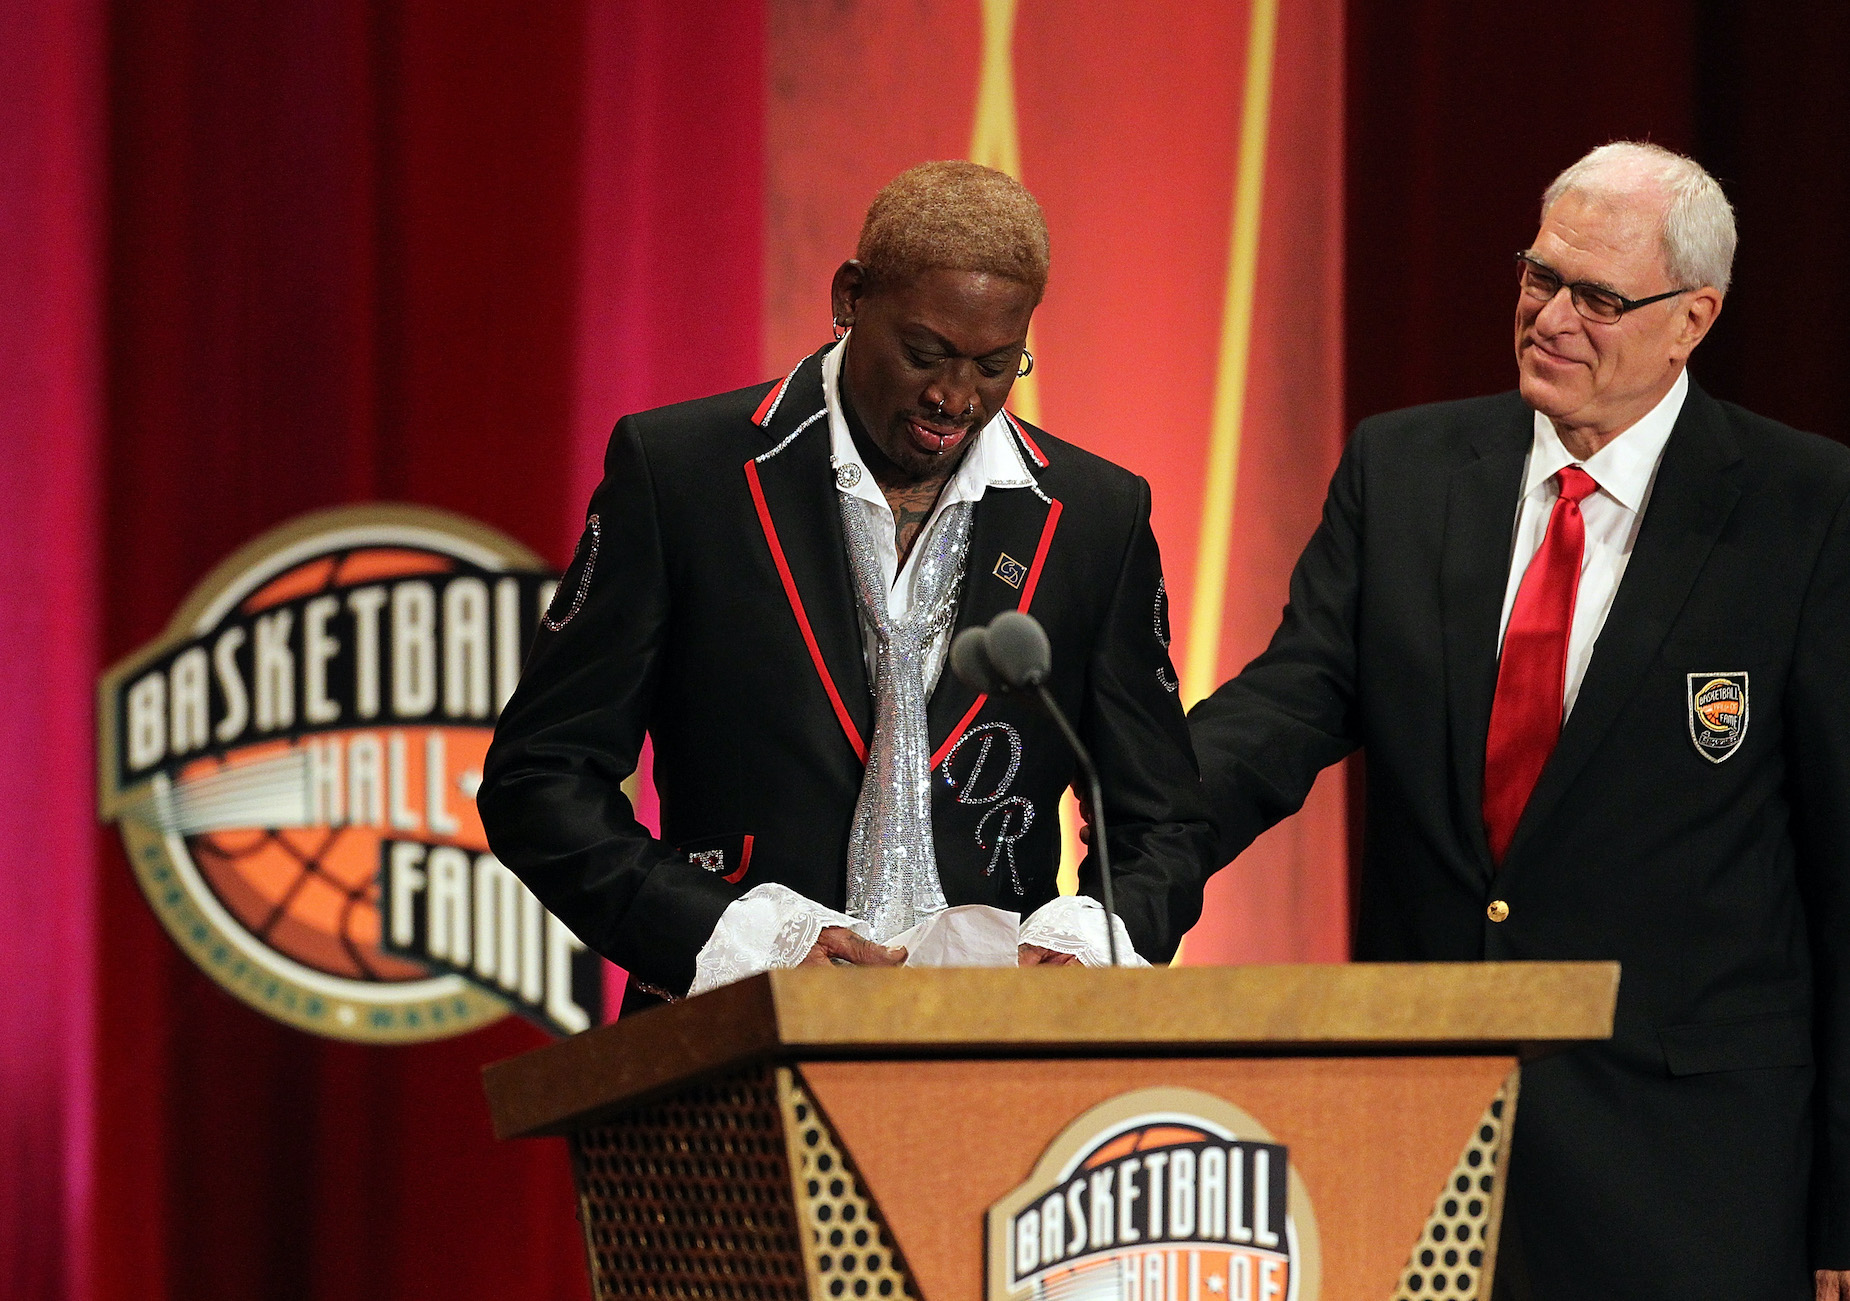 Phil Jackson (R) joins Dennis Rodman on stage during the latter's induction into the Basketball Hall of Fame.